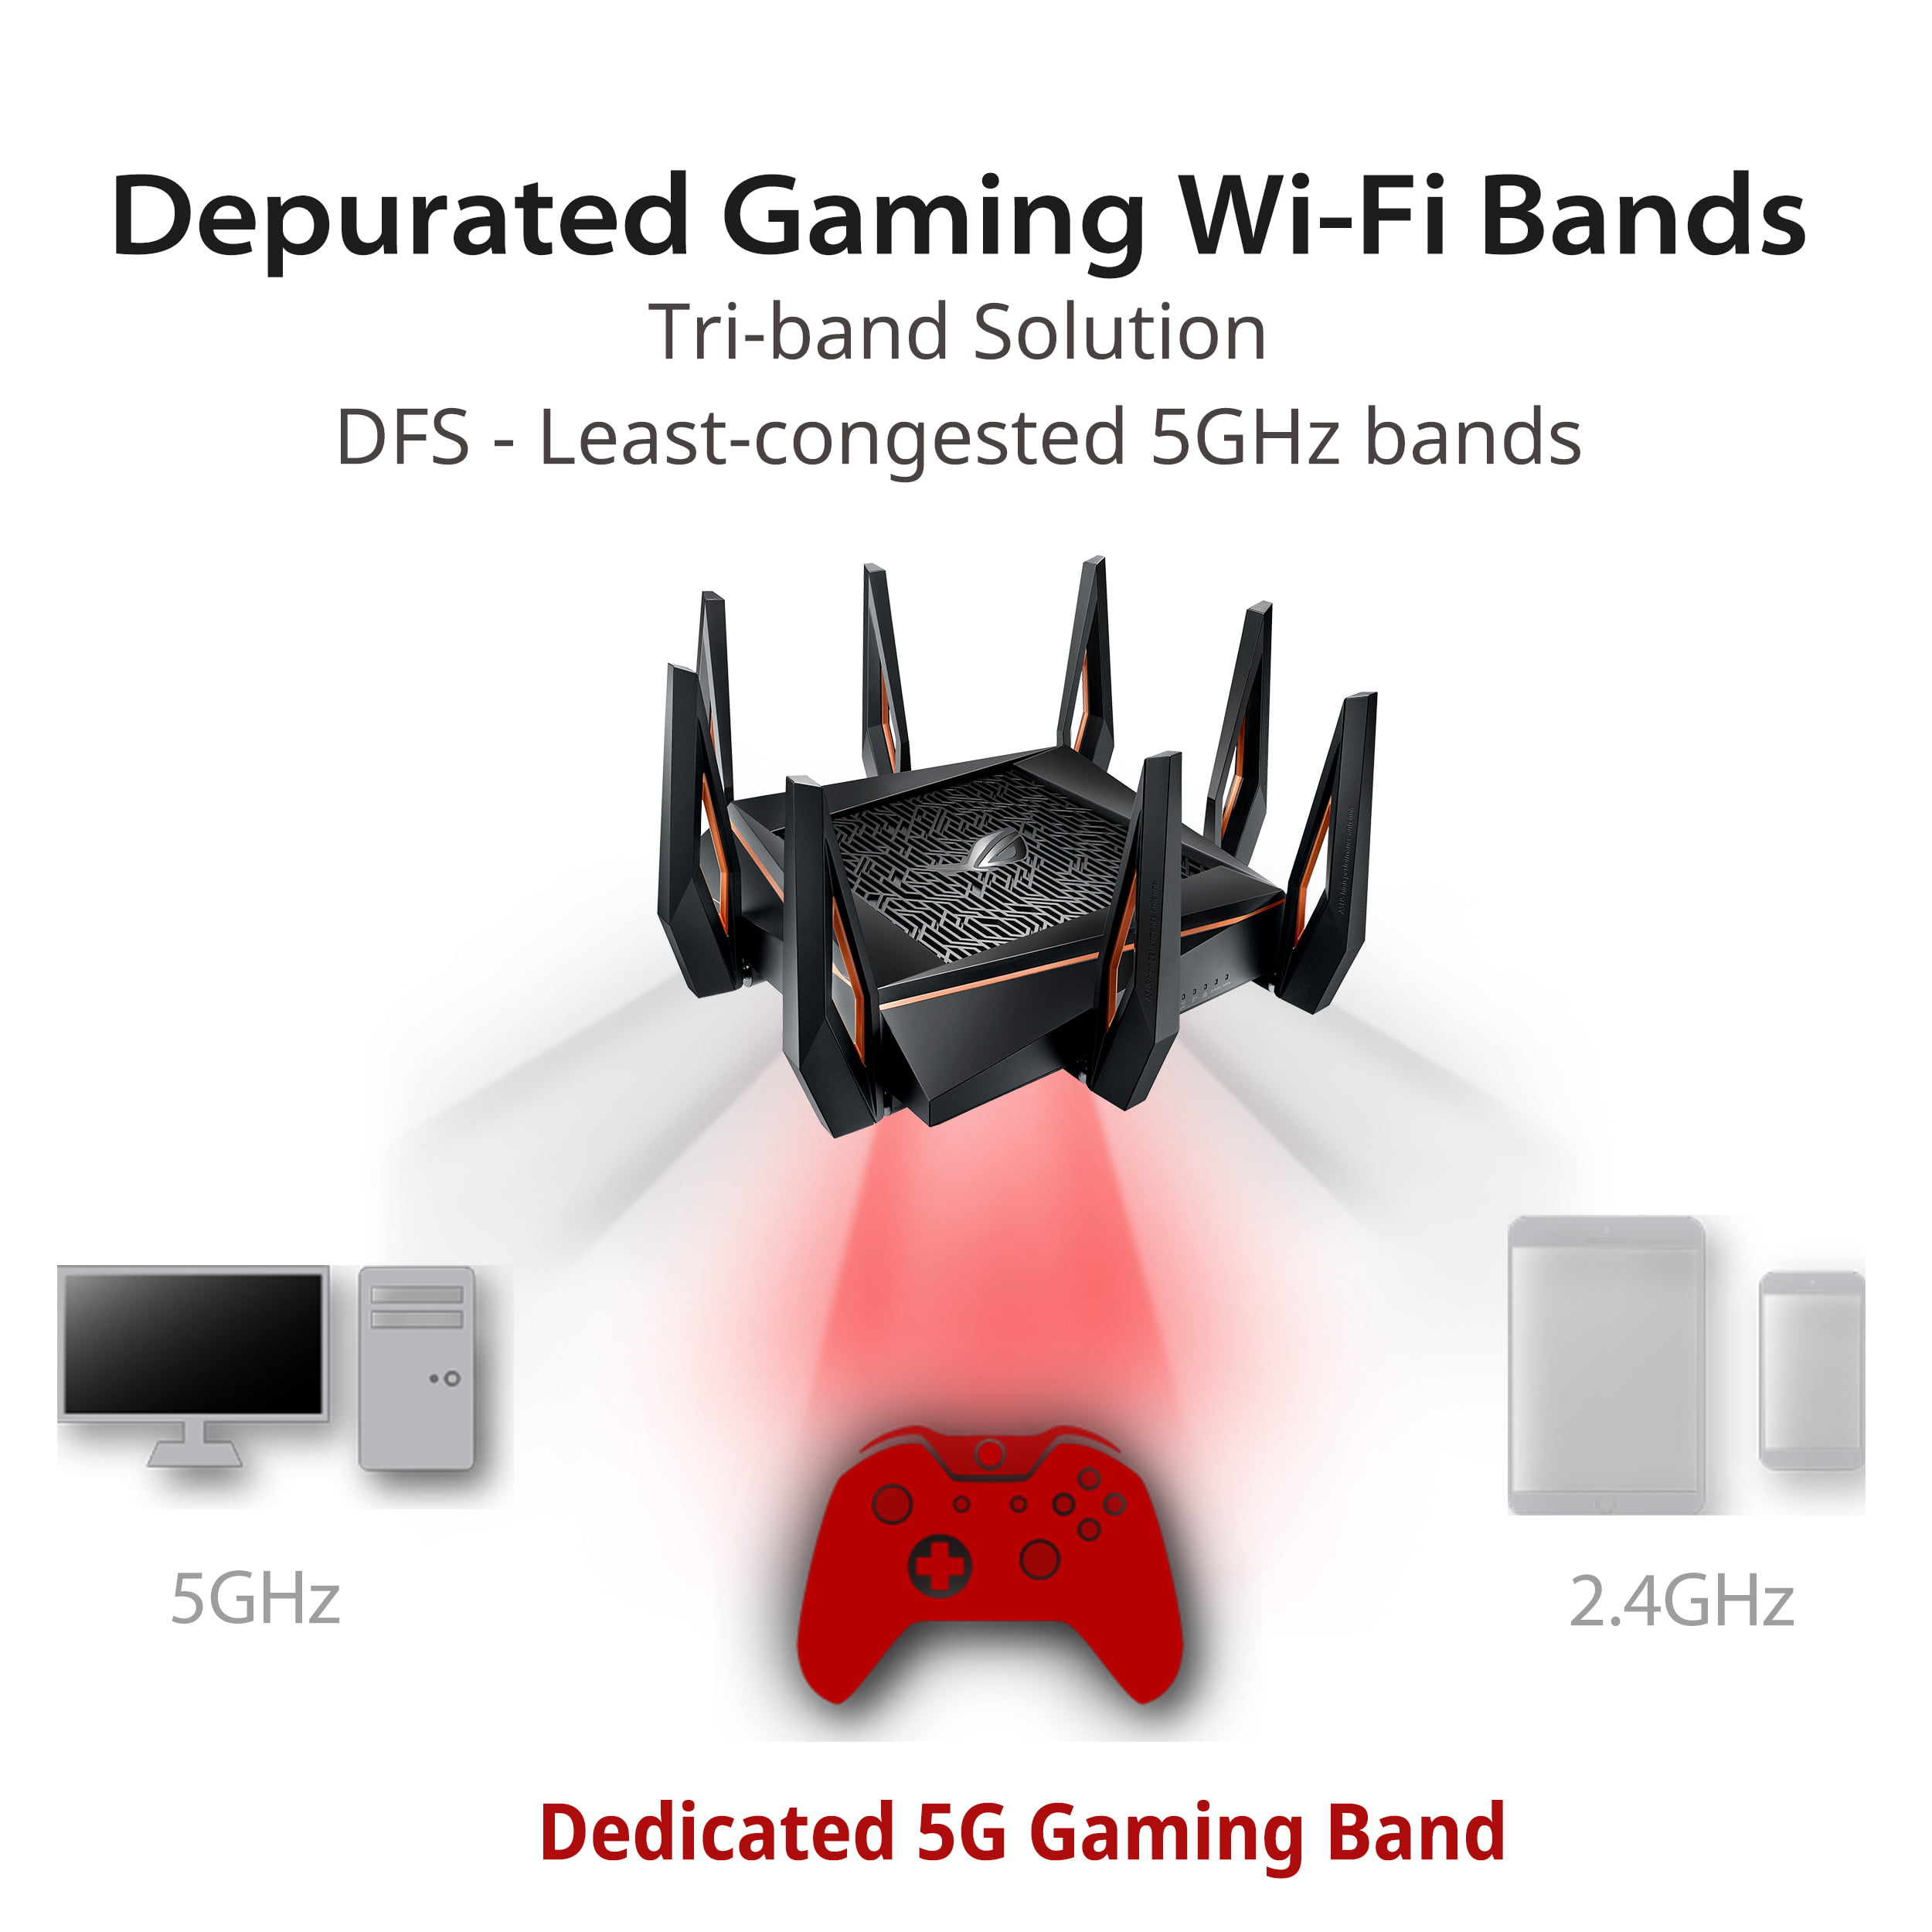 ASUS ROG Rapture GT AX AX Tri band  Gigabit WiFi Router,  AiProtection Lifetime Security by Trend Micro, AiMesh compatible for Mesh  Wi Fi